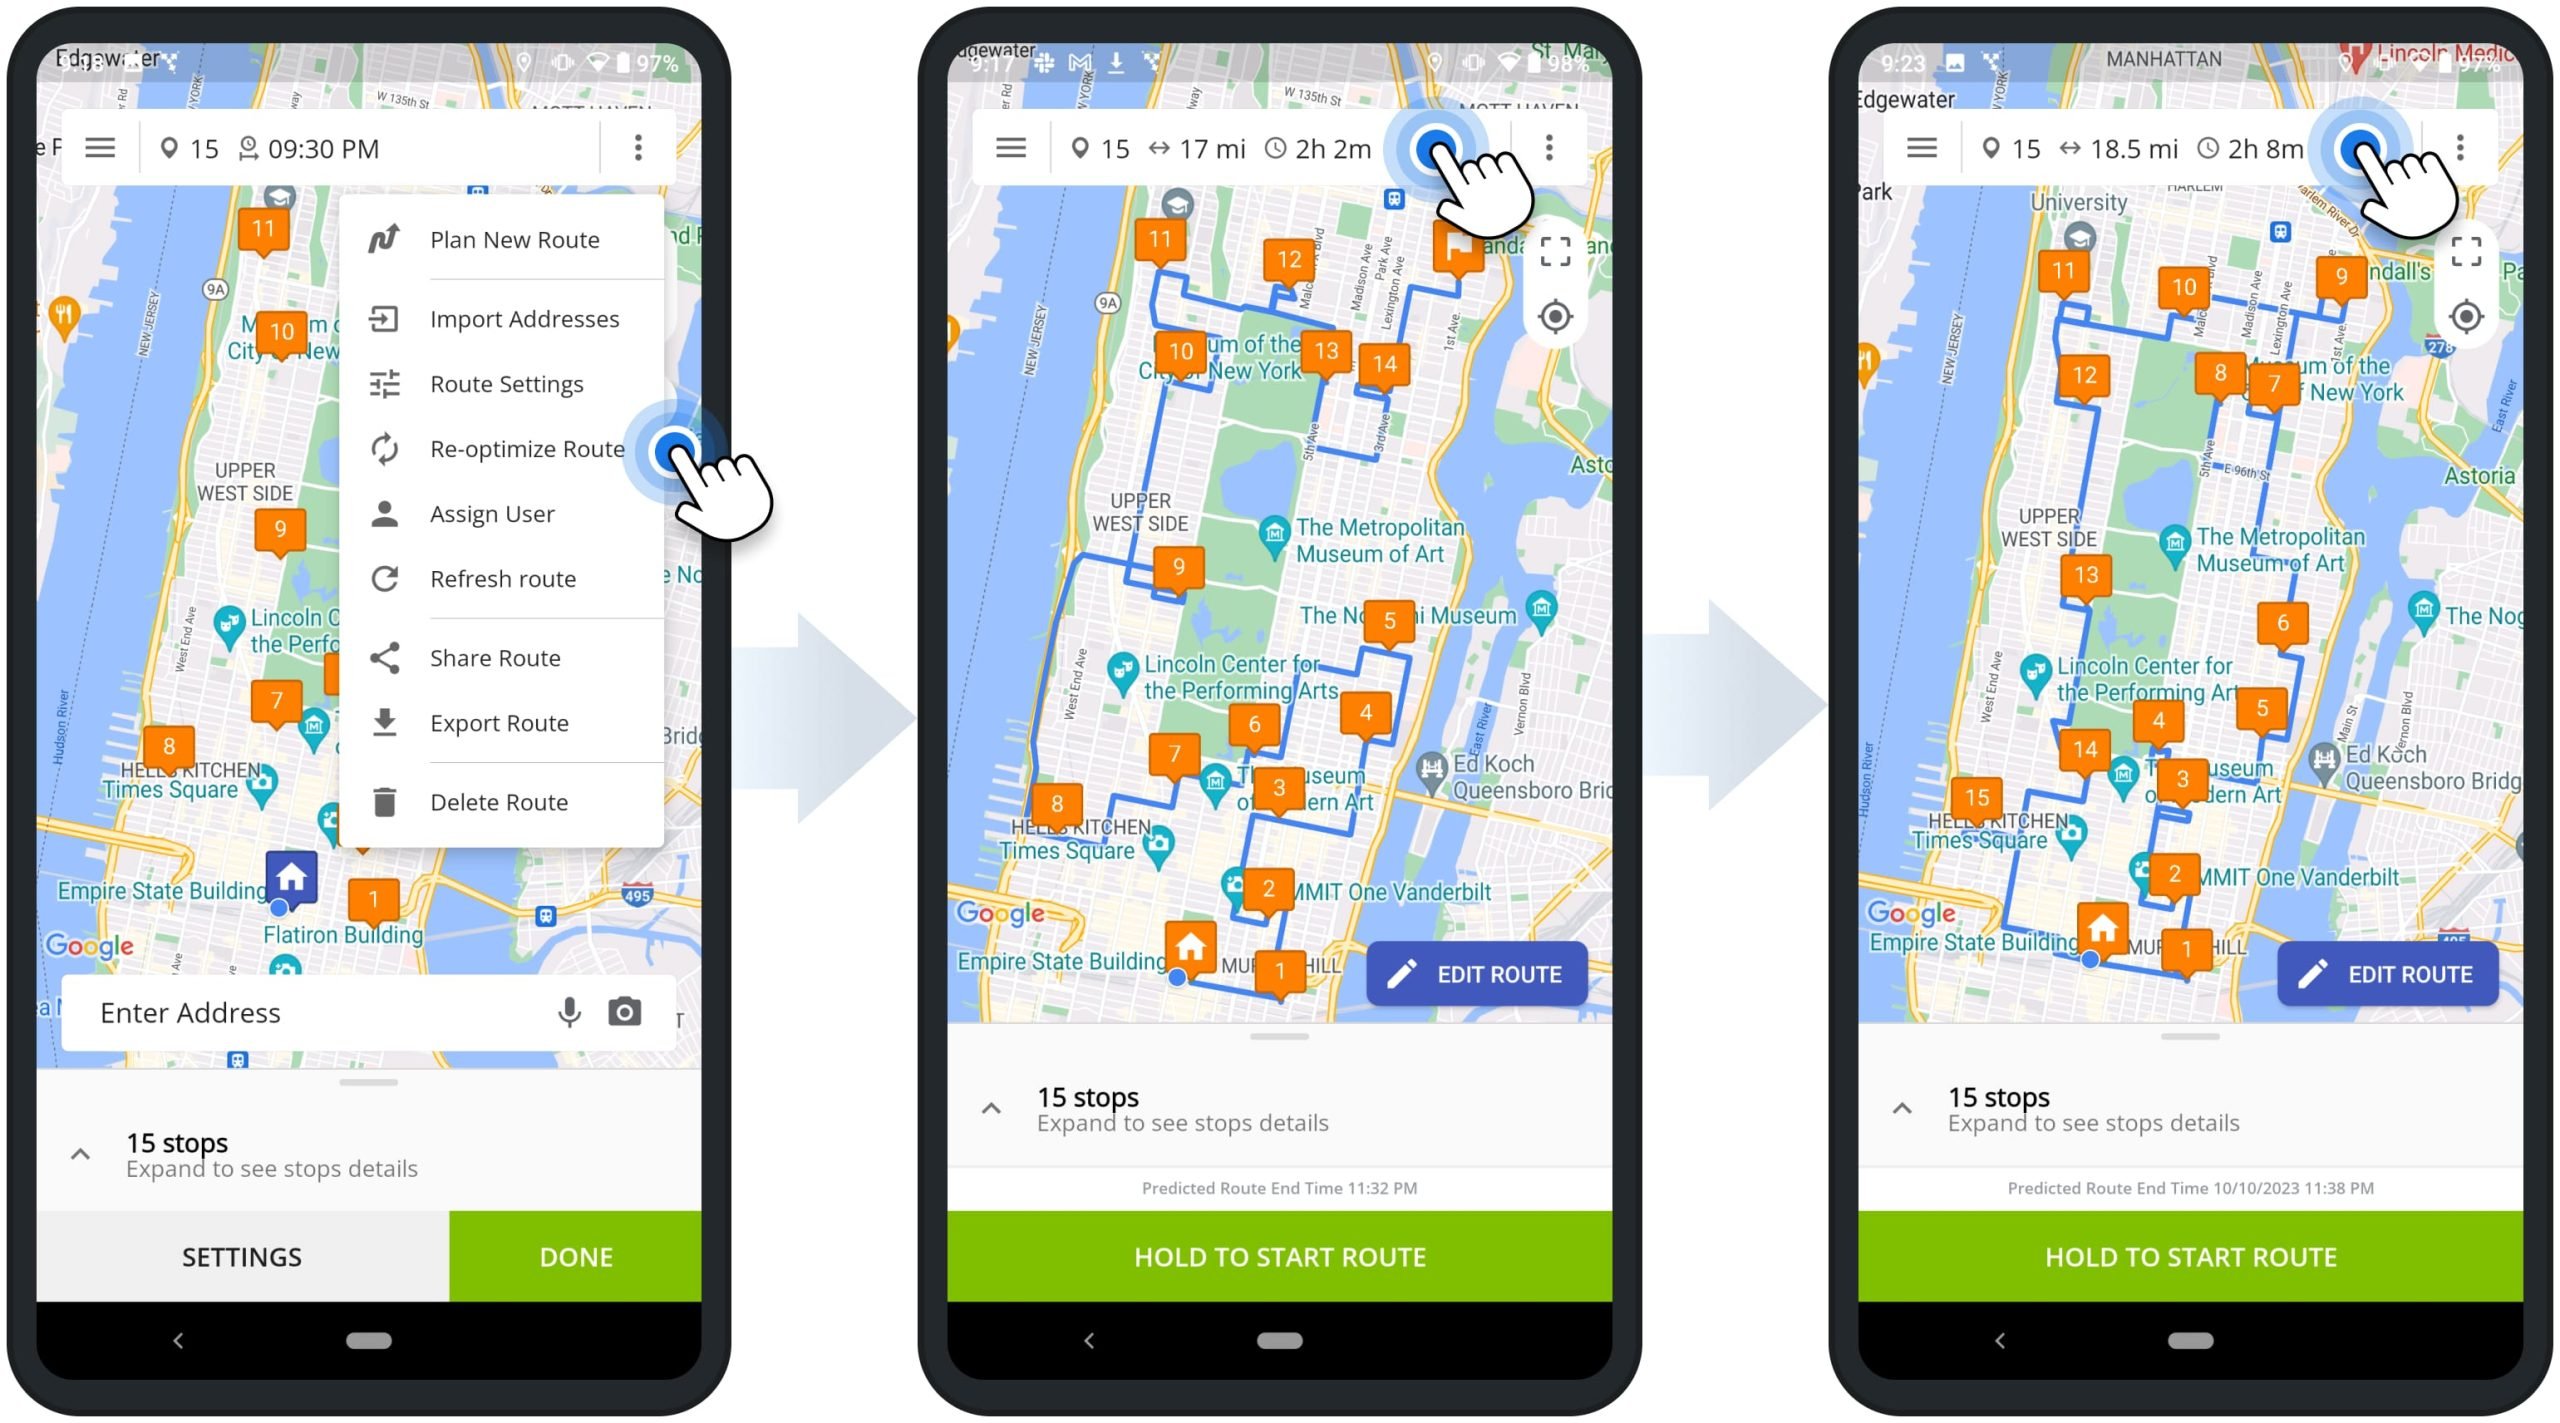 Re-optimize route to resequence stops using Route4Me's Android Multi-Addrtess Route Planner app for last-mile delivery drivers.